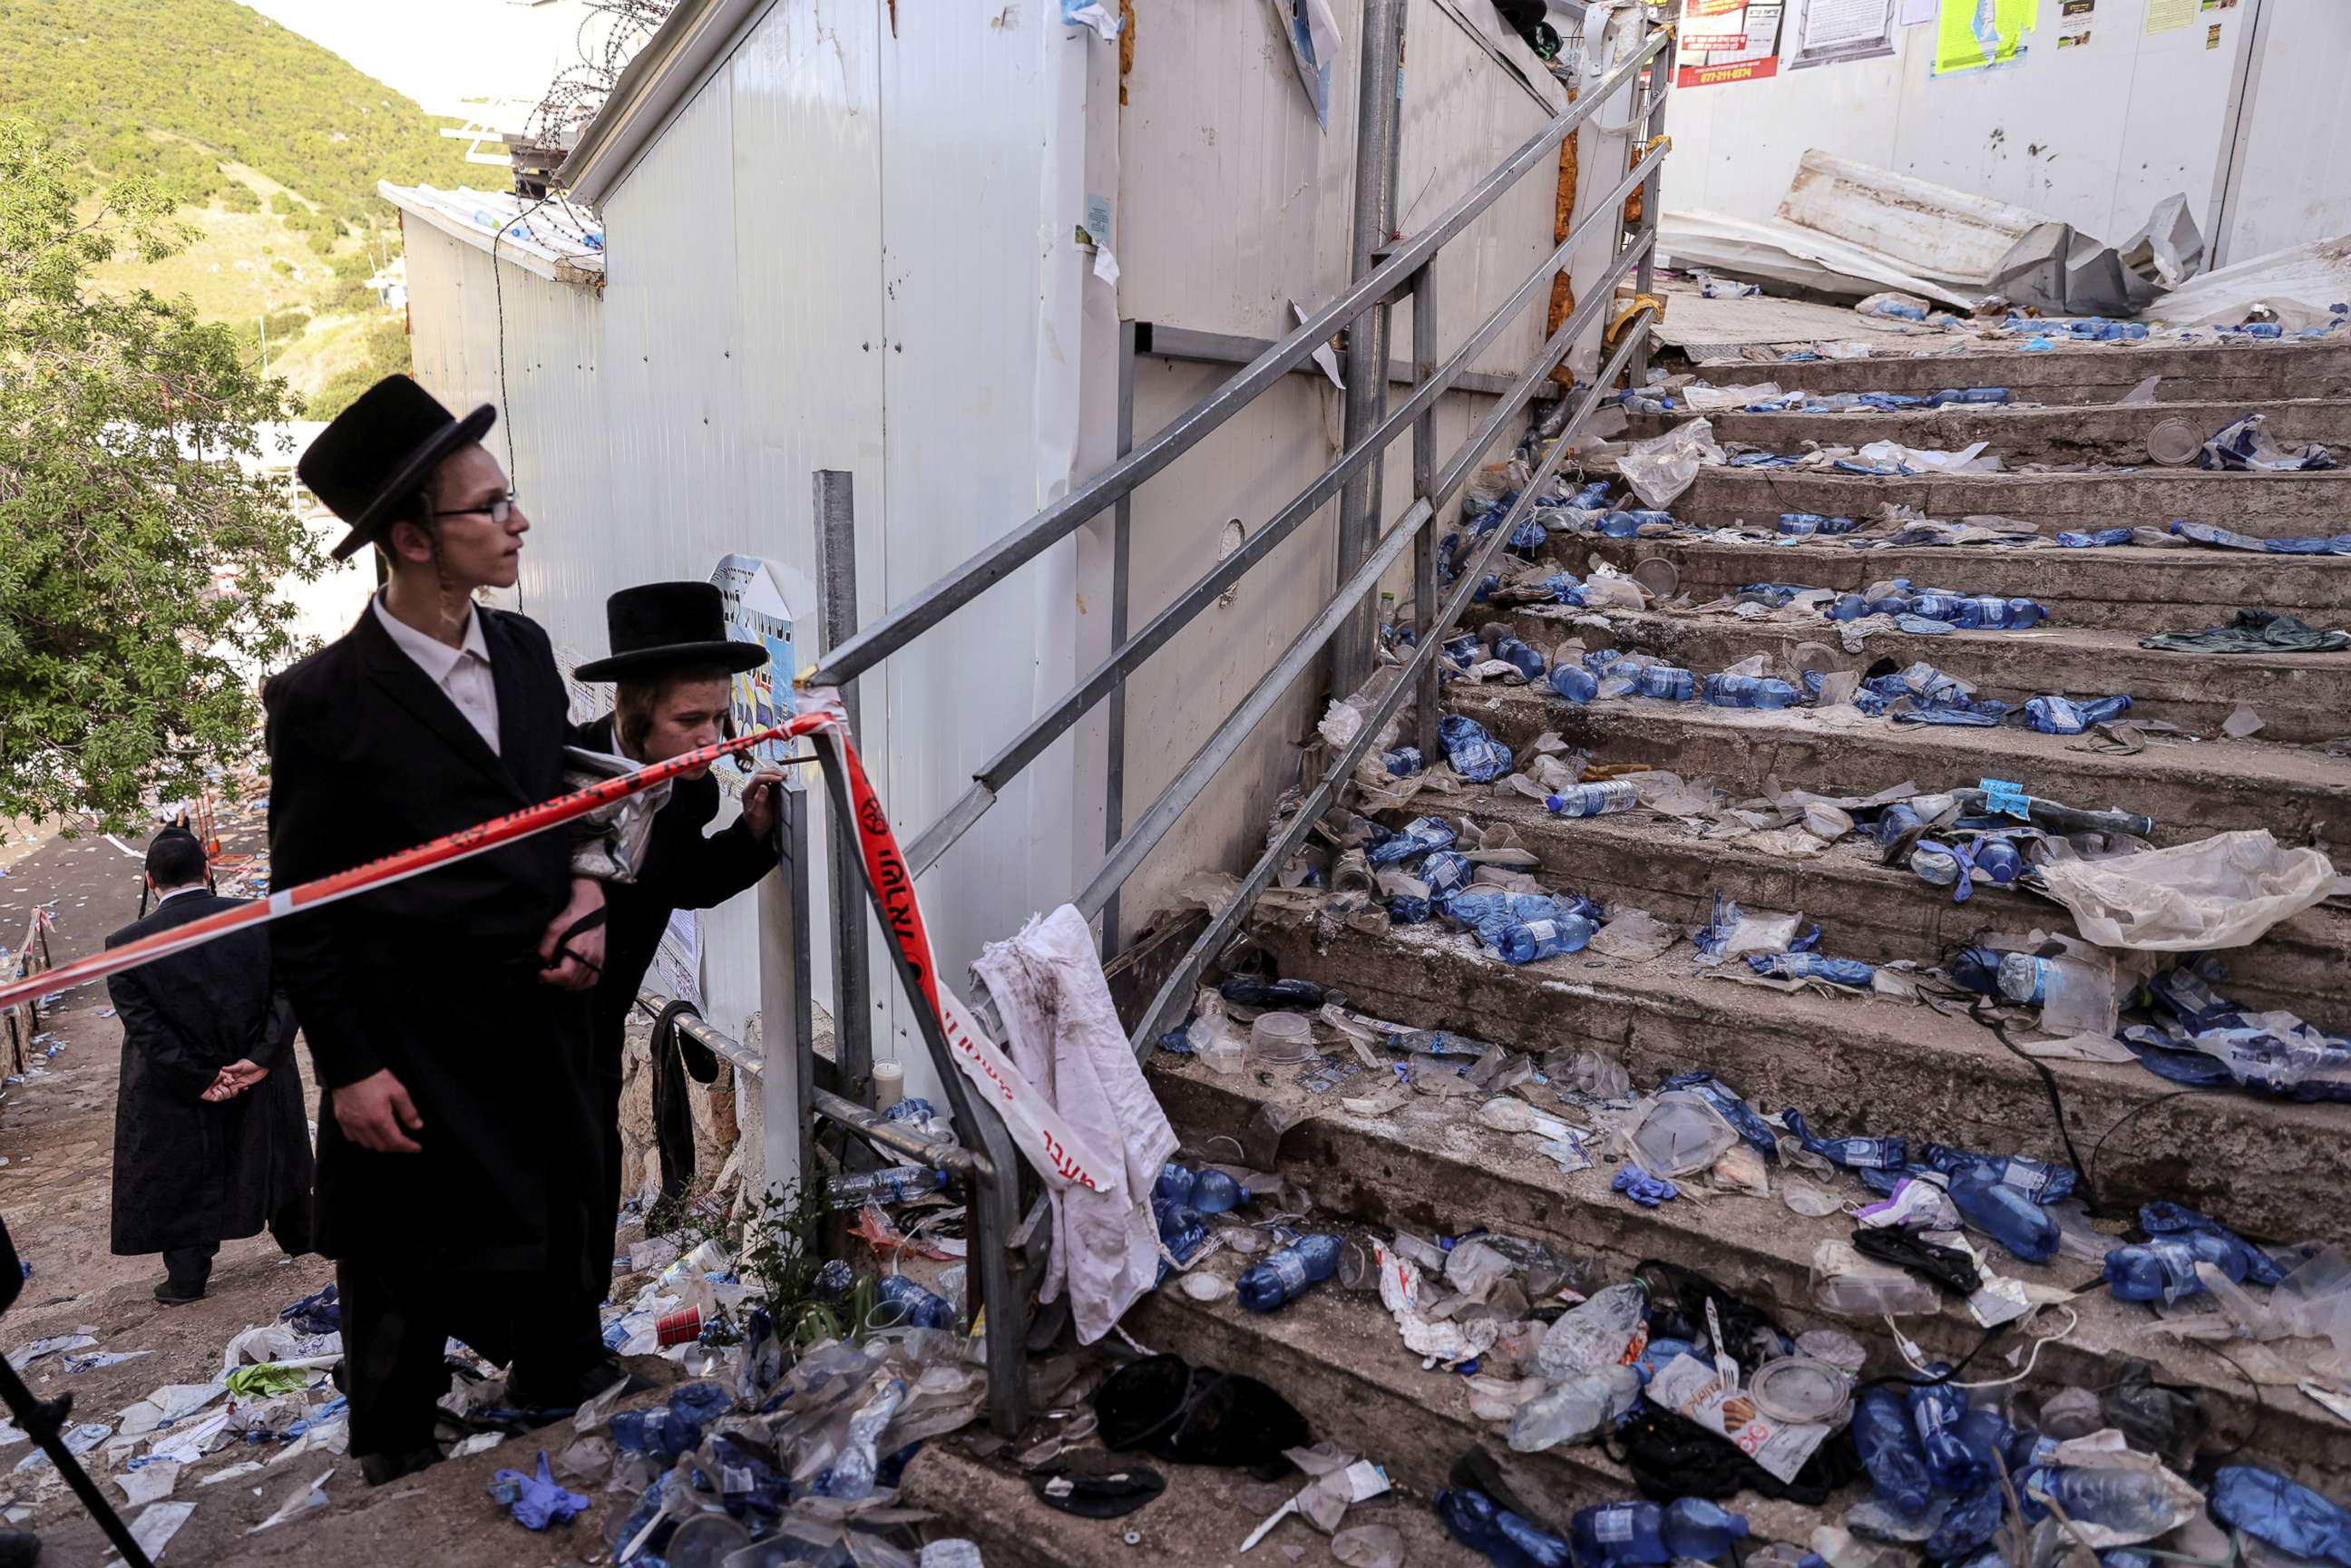 PHOTO: Ultra Orthodox Jews look at stairs littered with refuse in Mount Meron, northern Israel, where a stampede killed scores during an annual religious commemoration that include all-night prayer and dance, April 30, 2021.